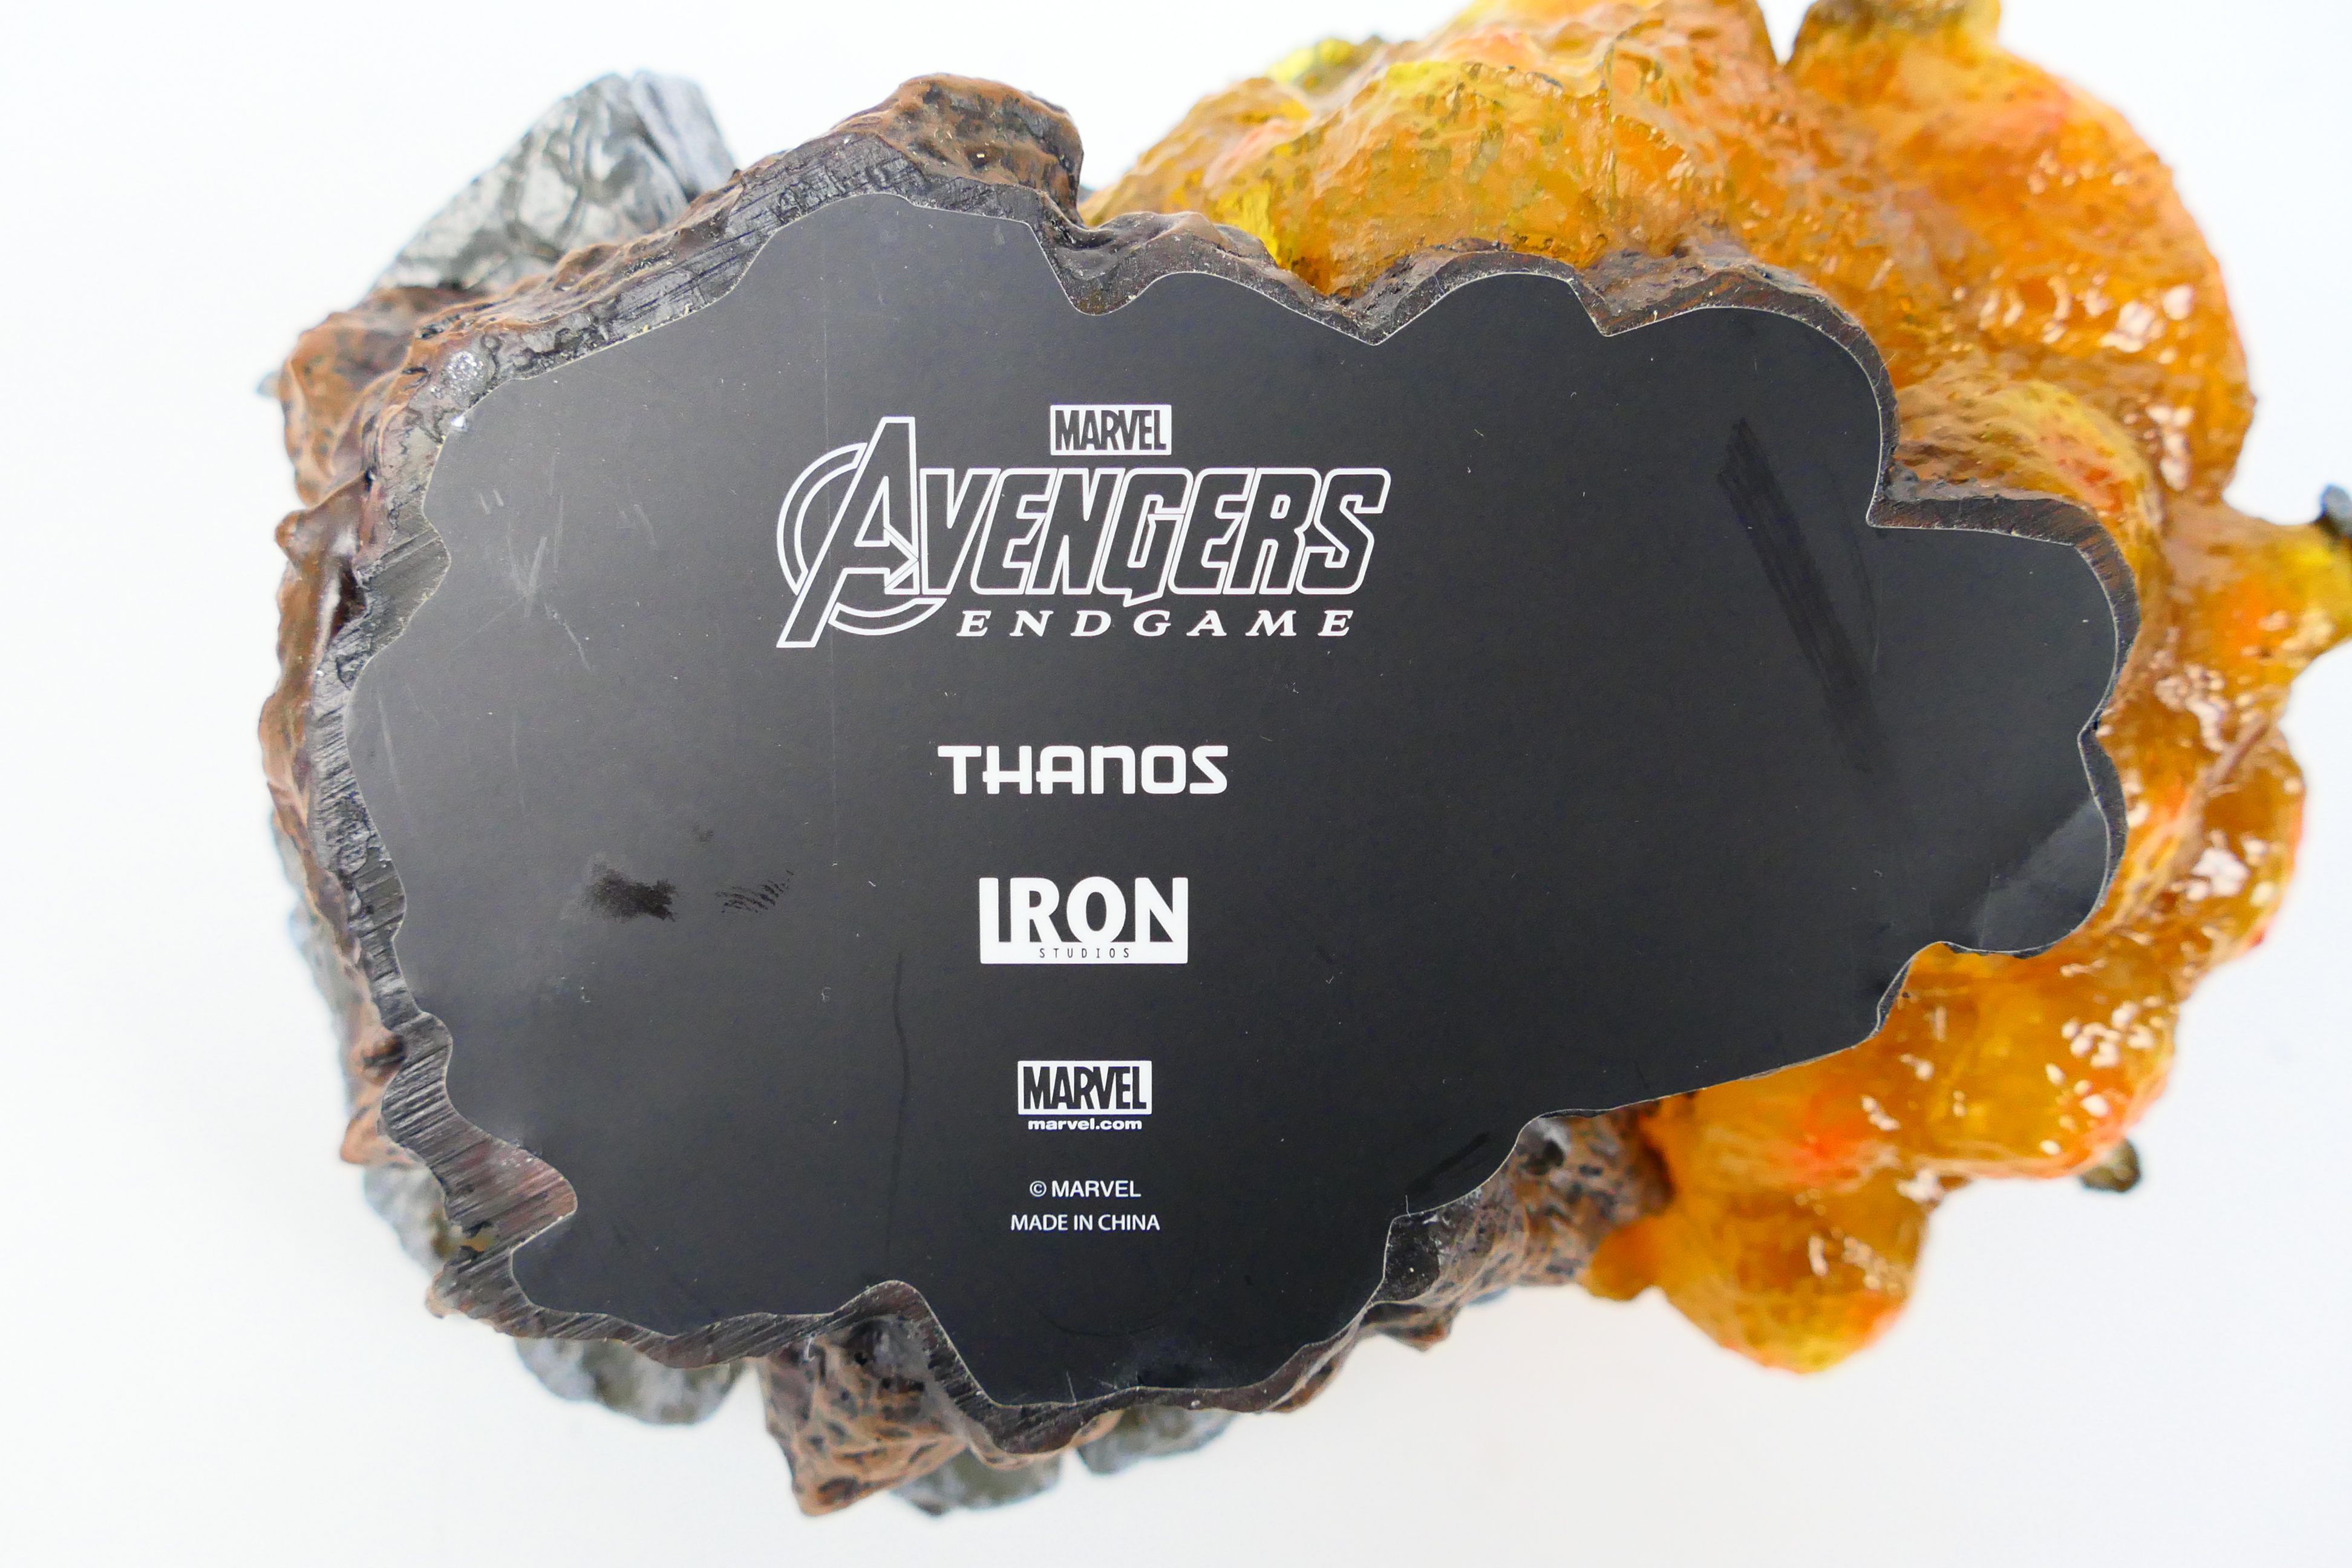 Marvel - Iron Studios - A limited edition BDS Deluxe Avengers Endgame Thanos statue in 1/10 scale. - Image 8 of 8